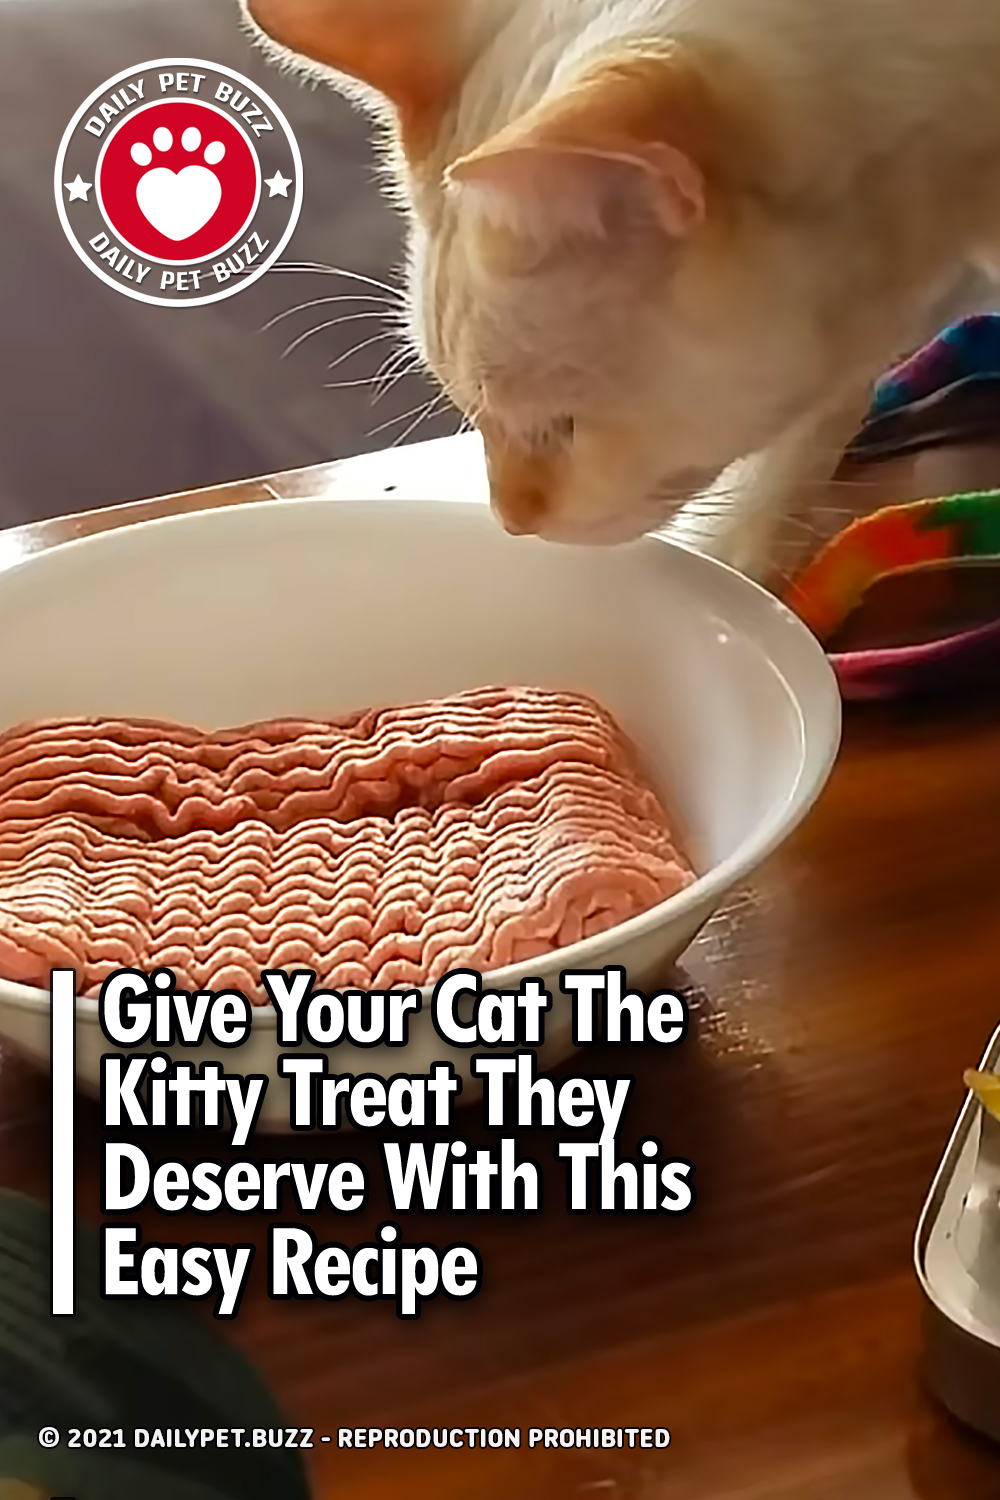 Give Your Cat The Kitty Treat They Deserve With This Easy Recipe